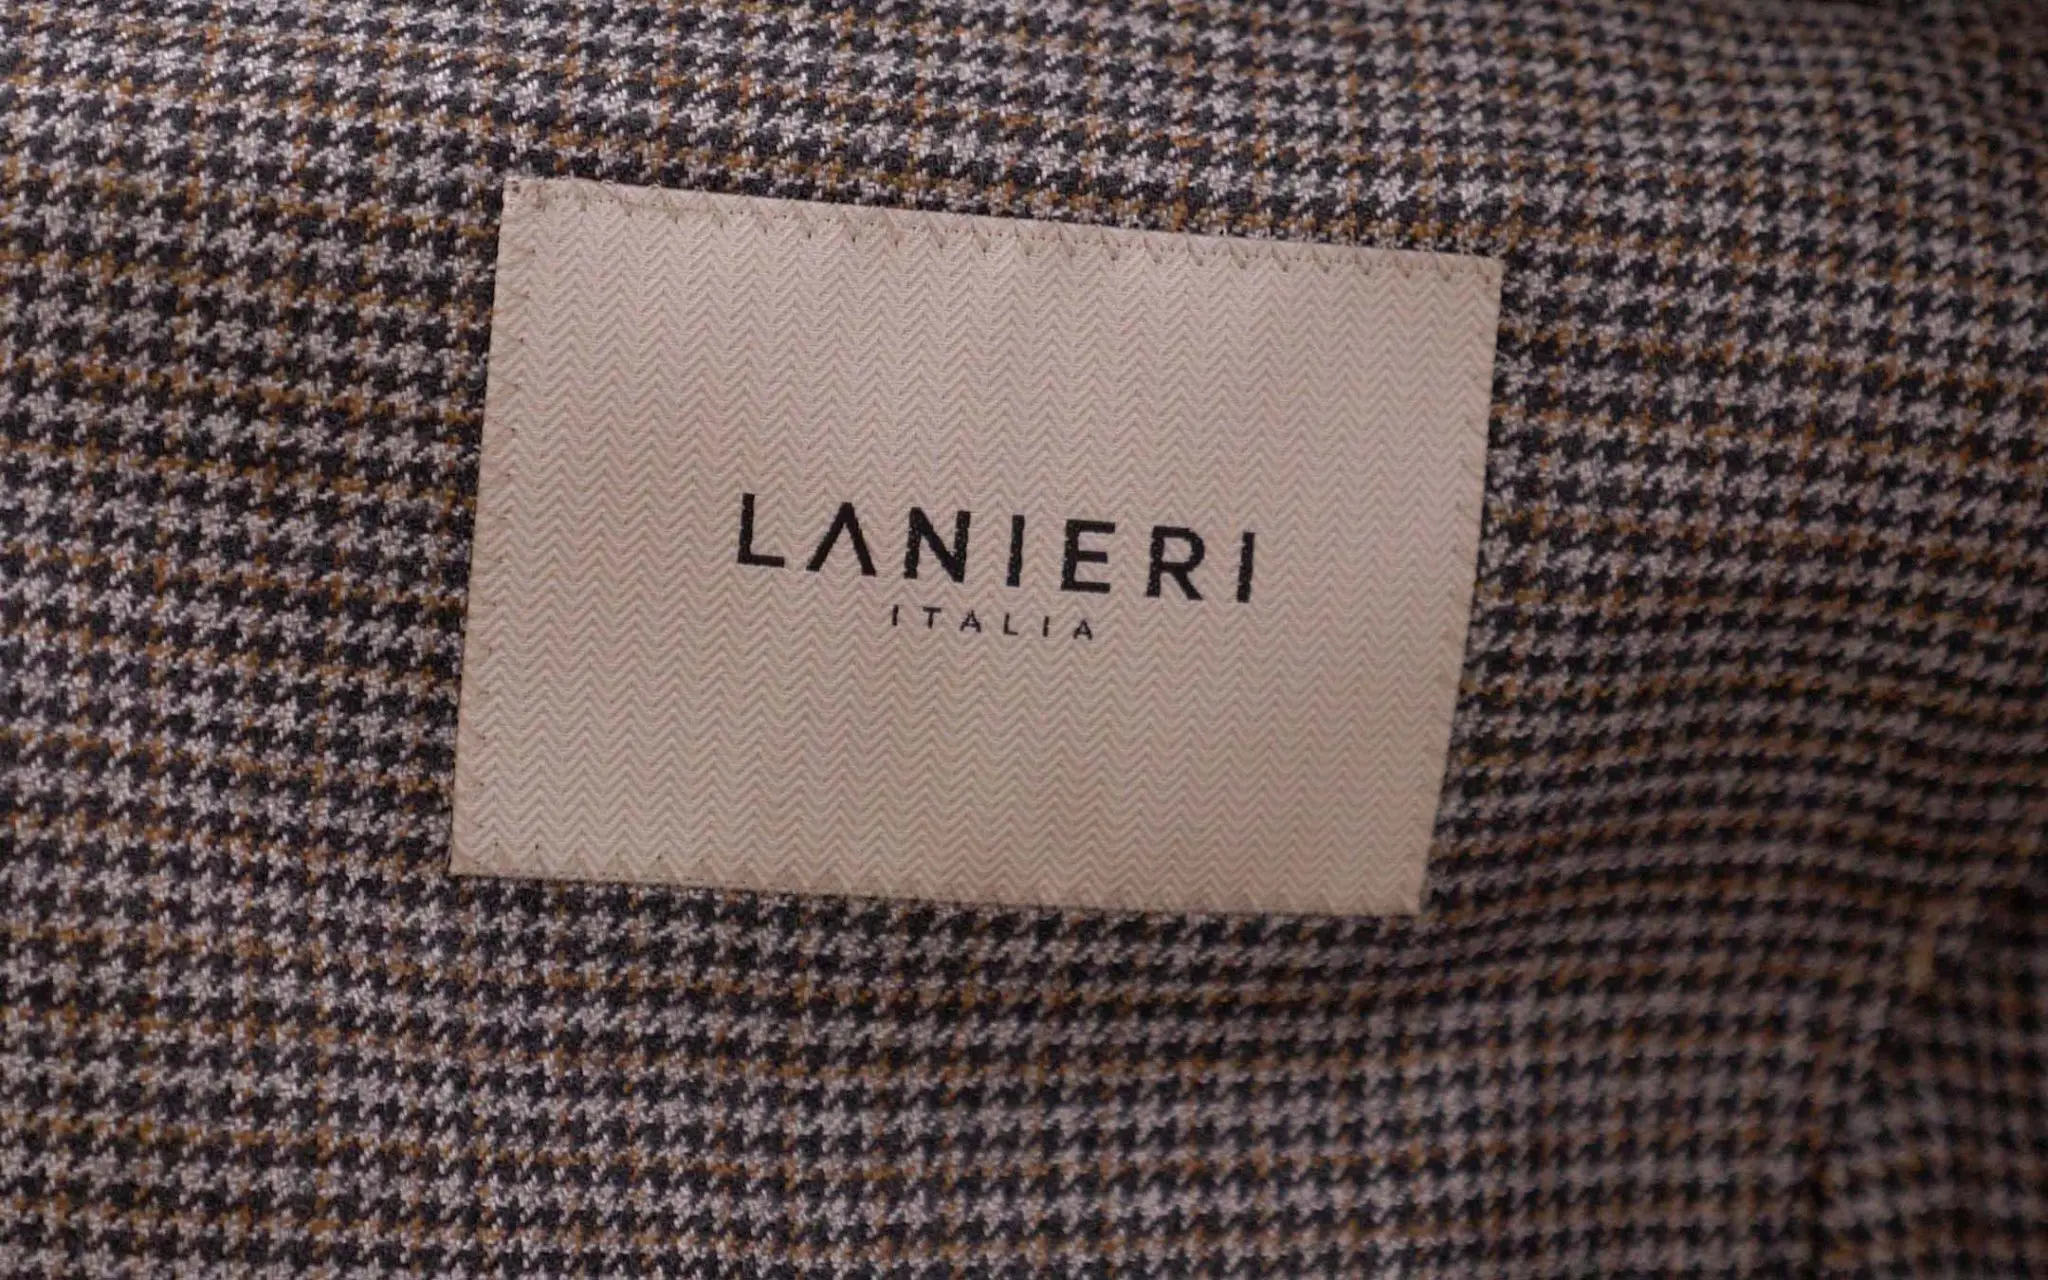 Lanieri Review: Do Italians Really Fit Better? - The Modest Man